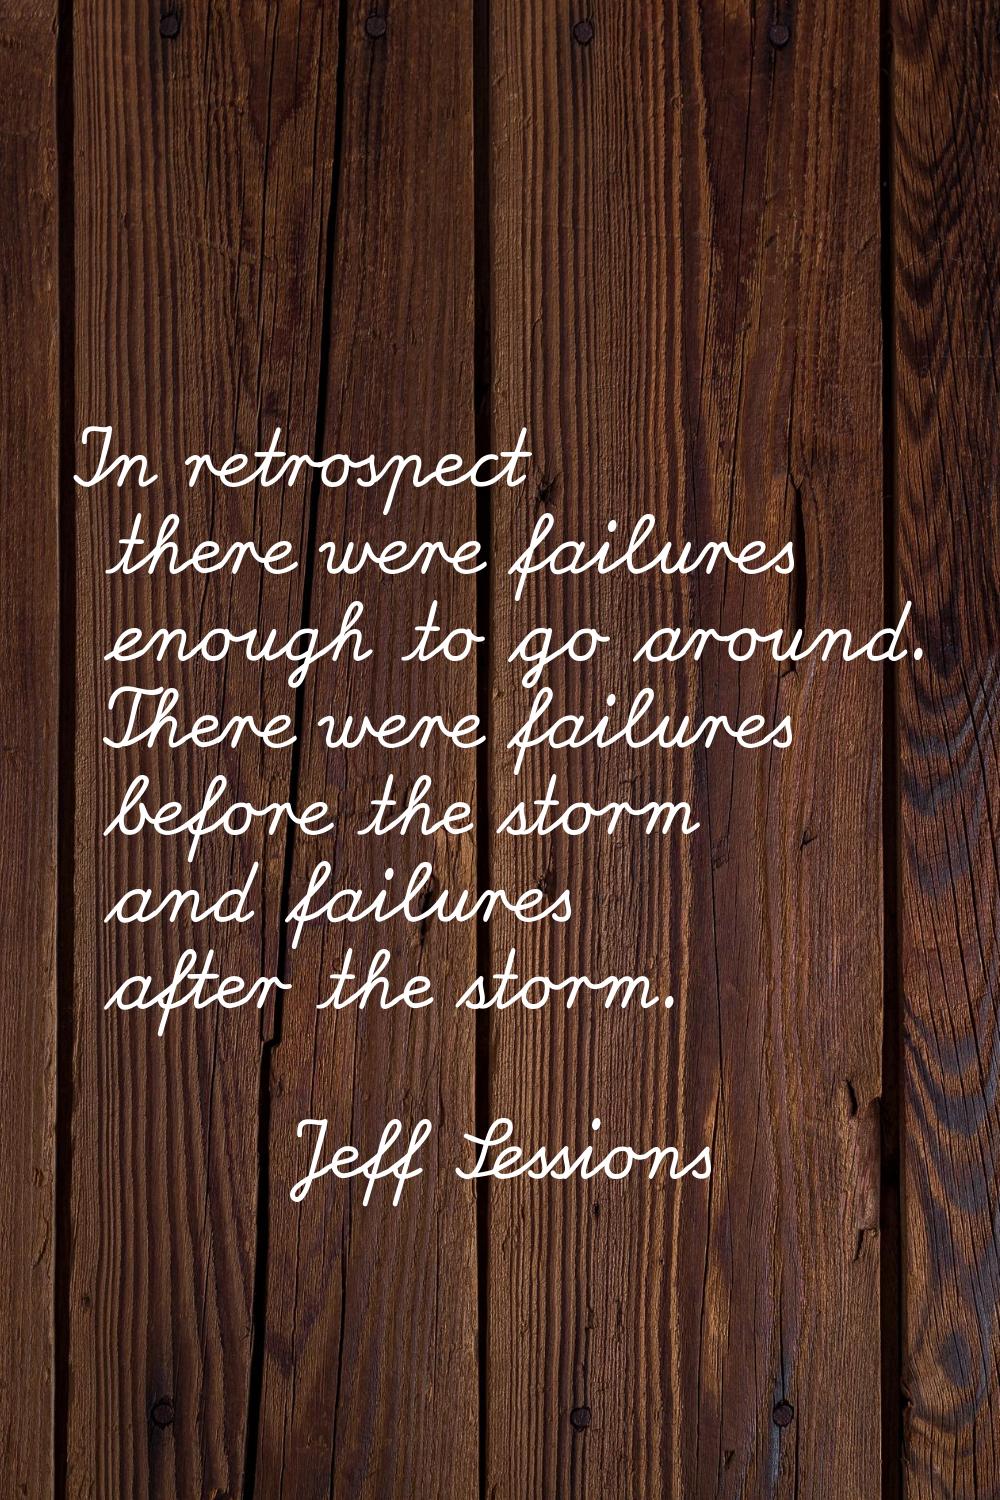 In retrospect there were failures enough to go around. There were failures before the storm and fai